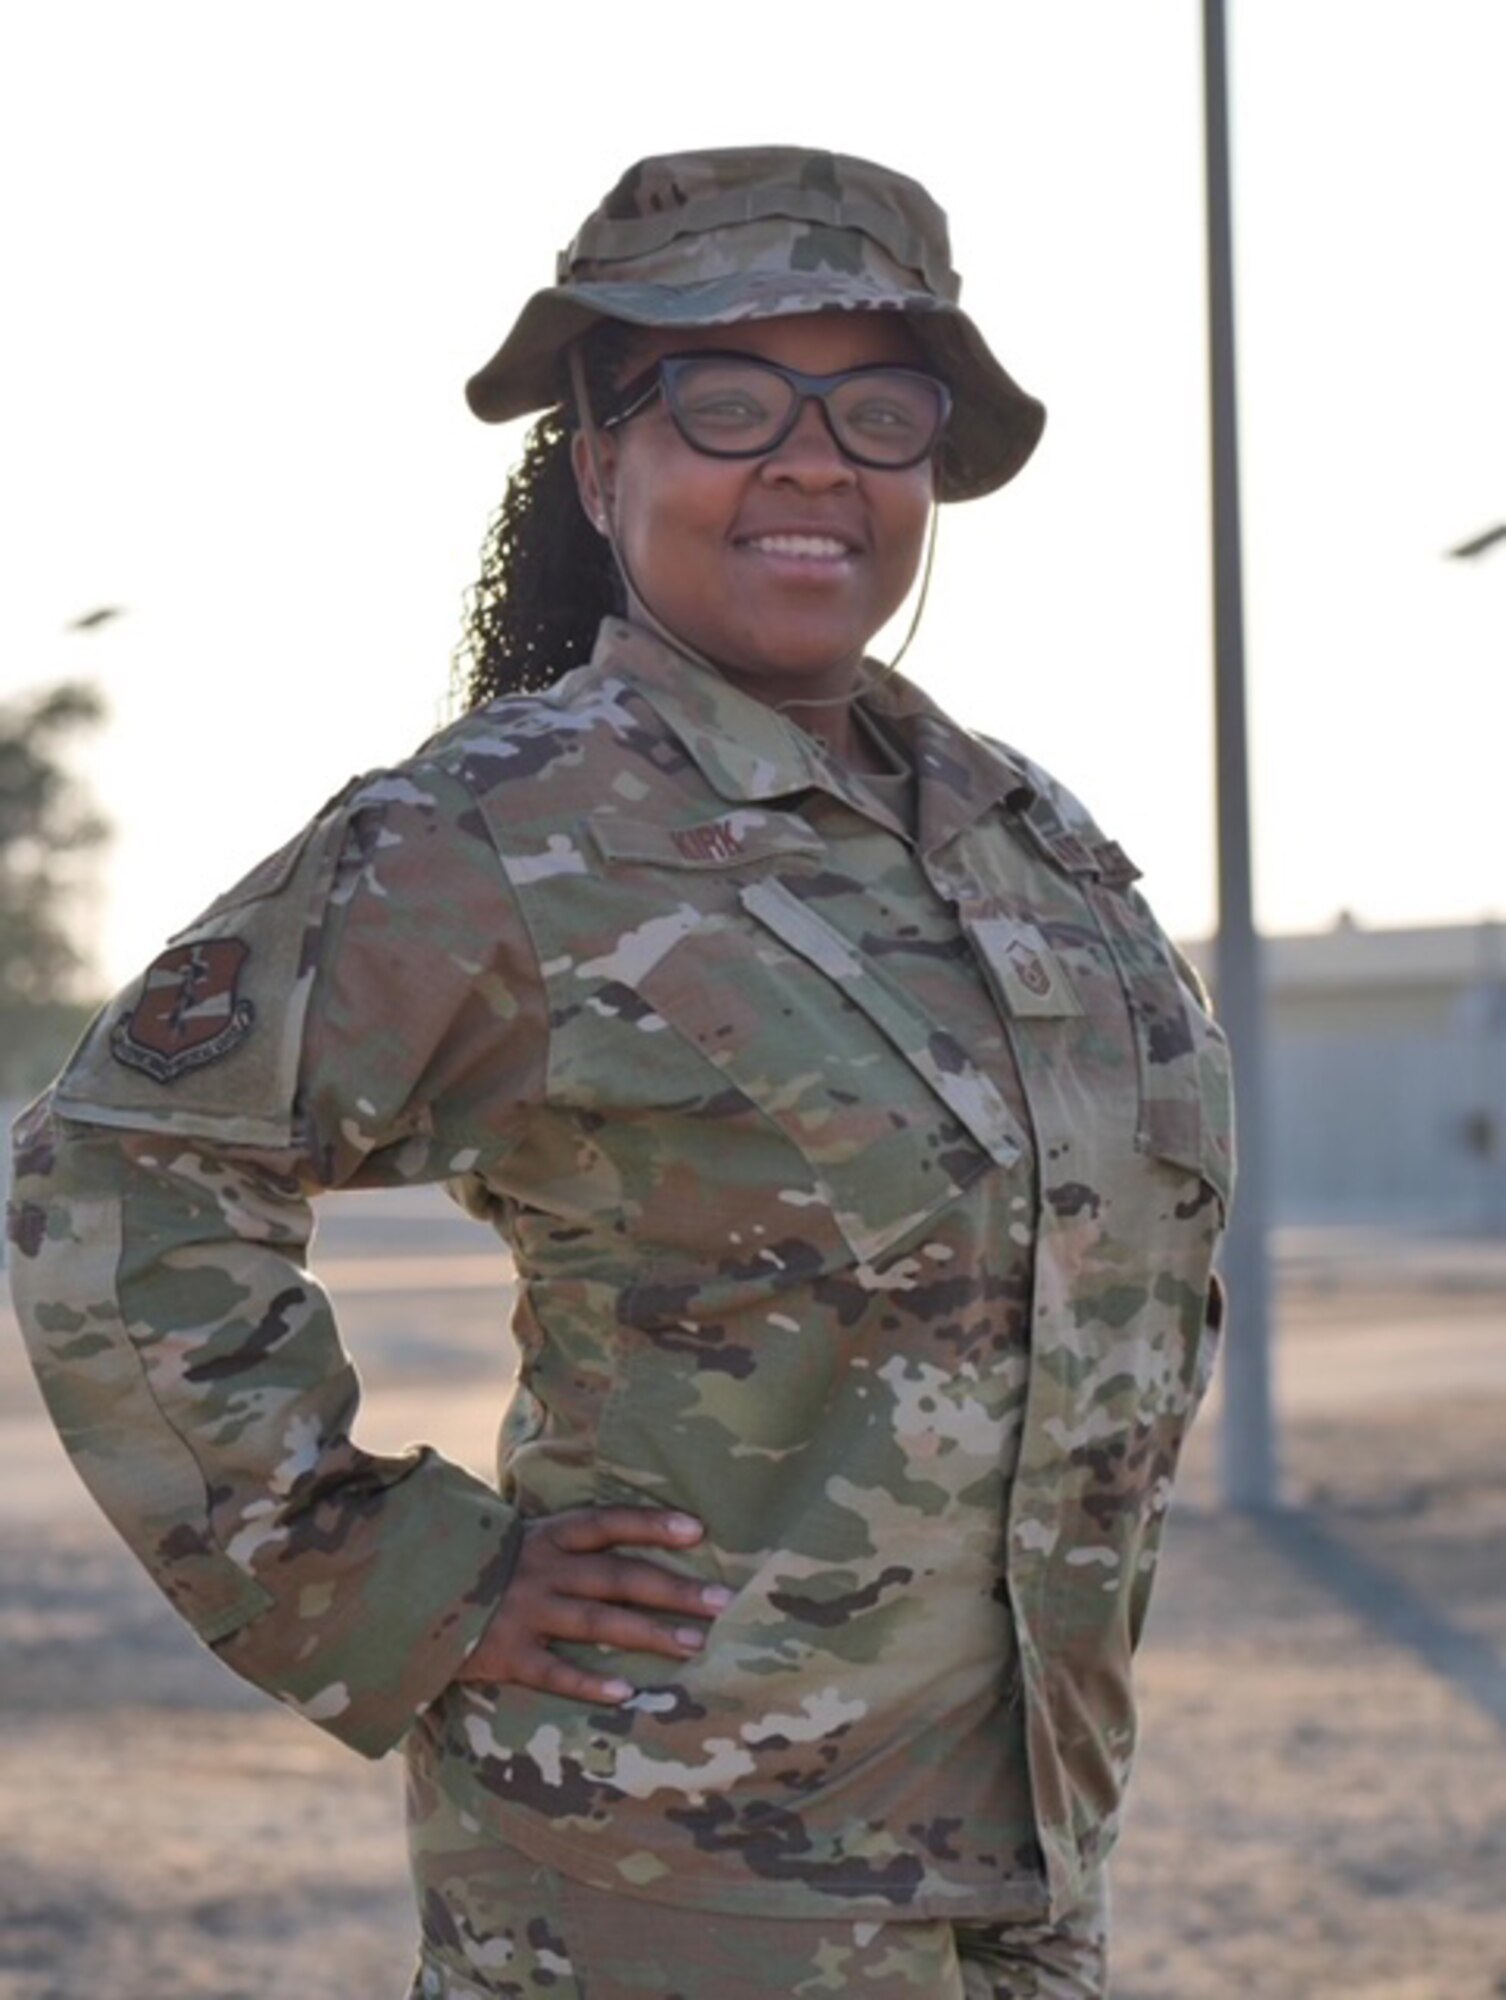 Air Force Airman poses for a photo while on deployment. She is wearing an OCP pattern uniform and boonie hat.